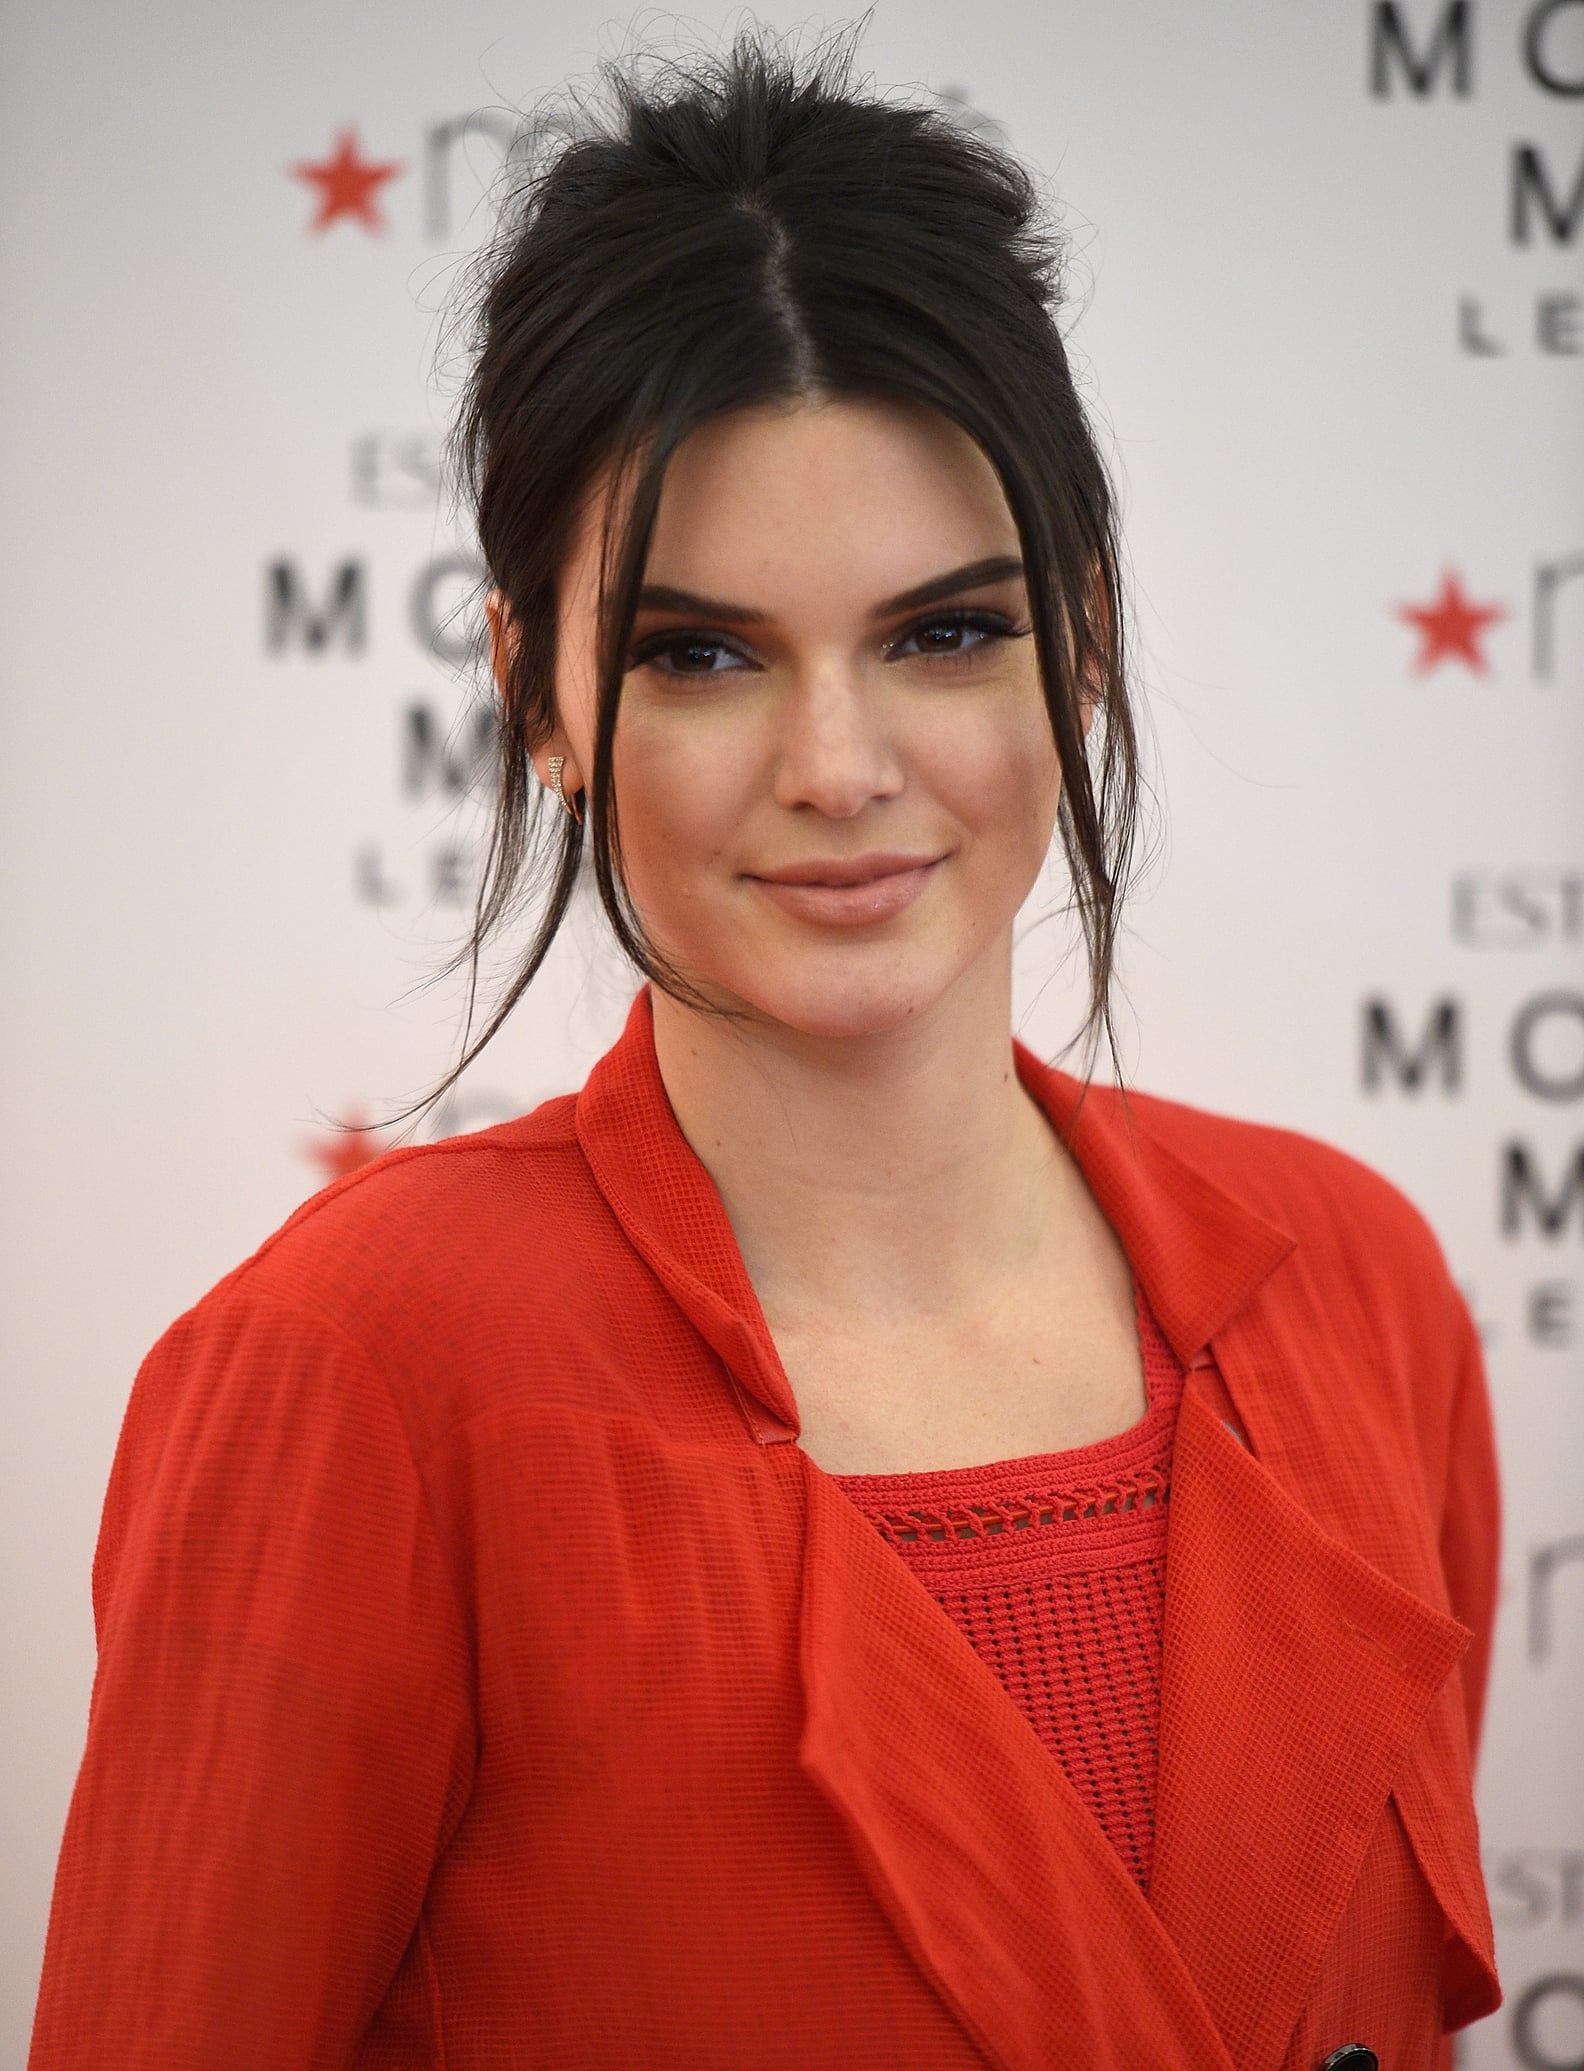 Kendall Jenner With Acne | POPSUGAR Beauty